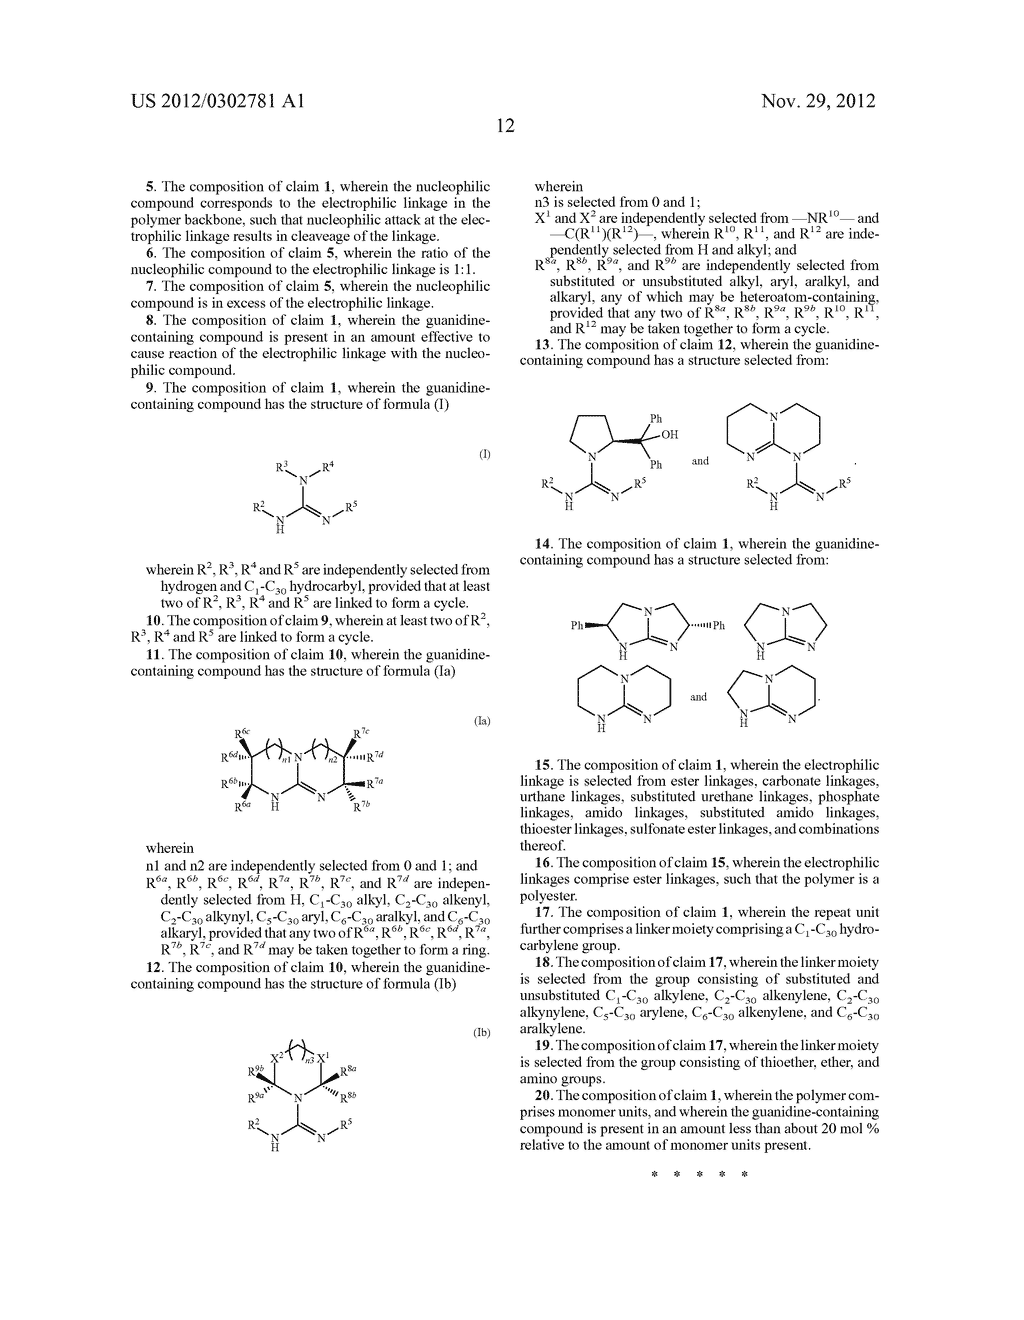 Catalytic Depolymerization of Polymers Containing Electrophilic Linkages     Using Nucleophilic Reagents - diagram, schematic, and image 14